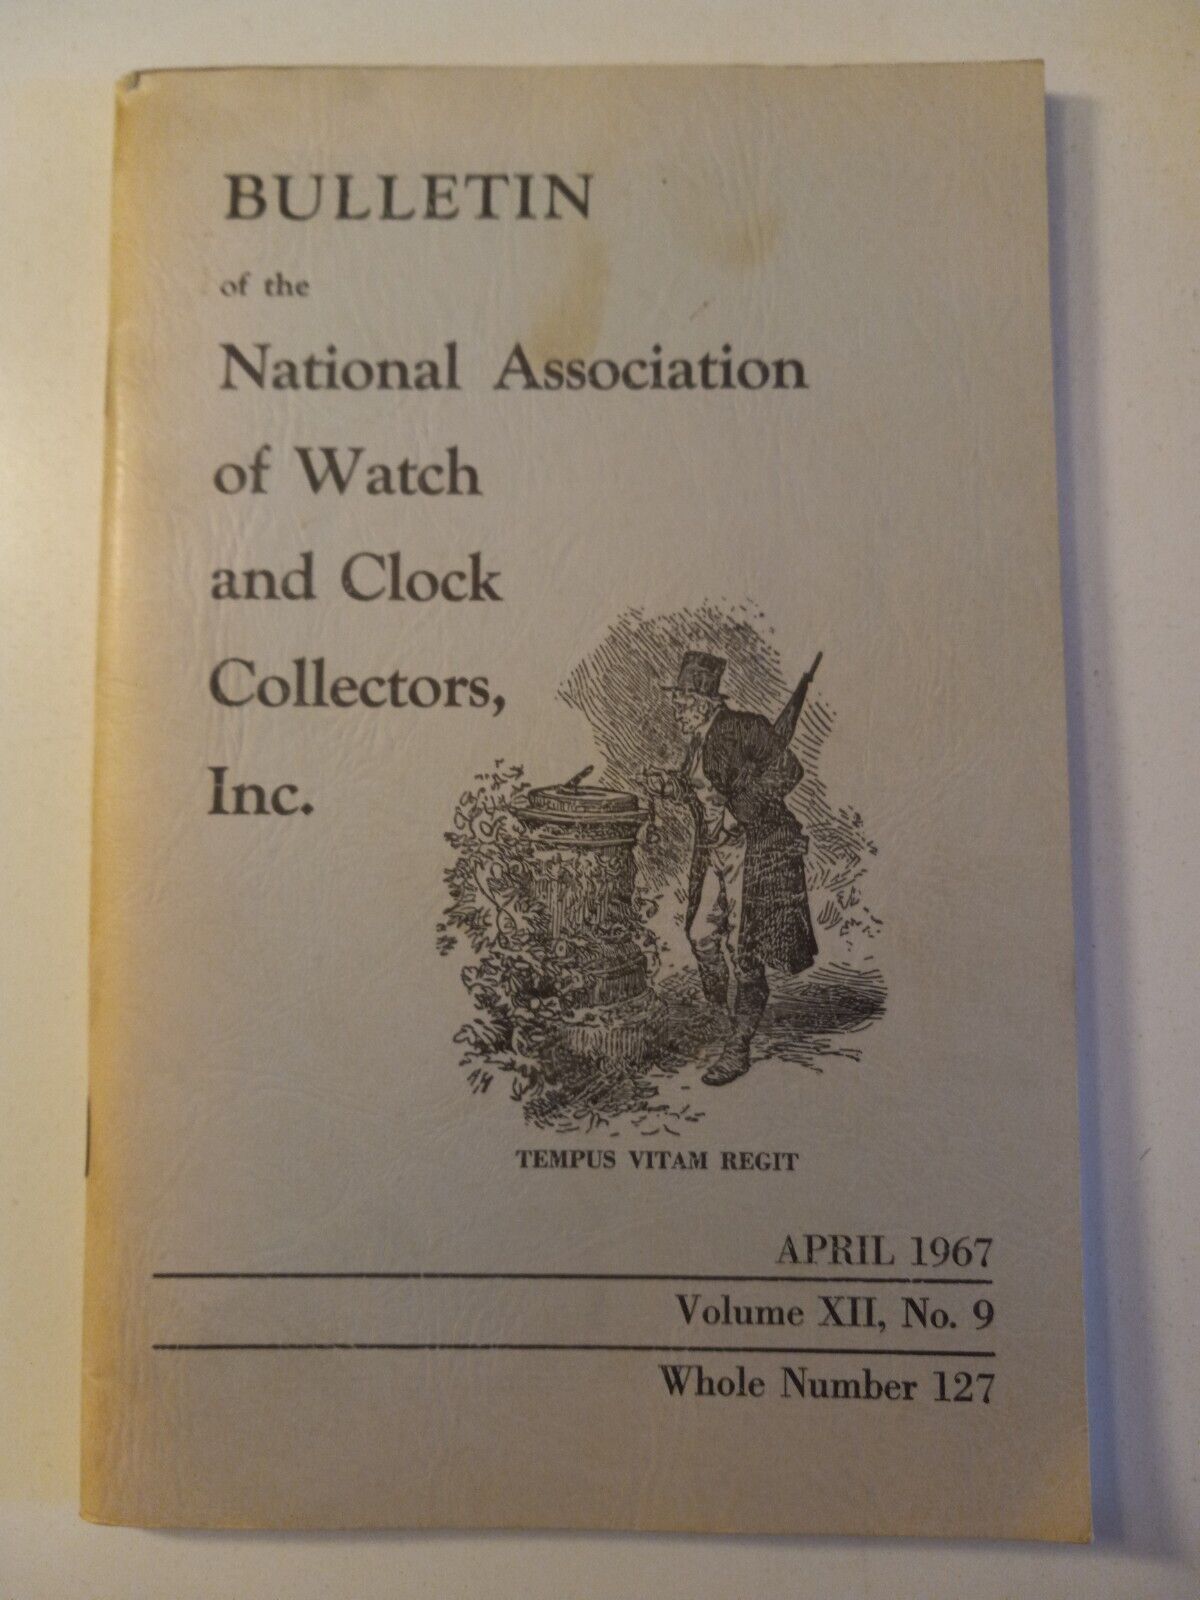 BULLETIN of the National Association of Watch and Clock Collectors 1967 XII No.9